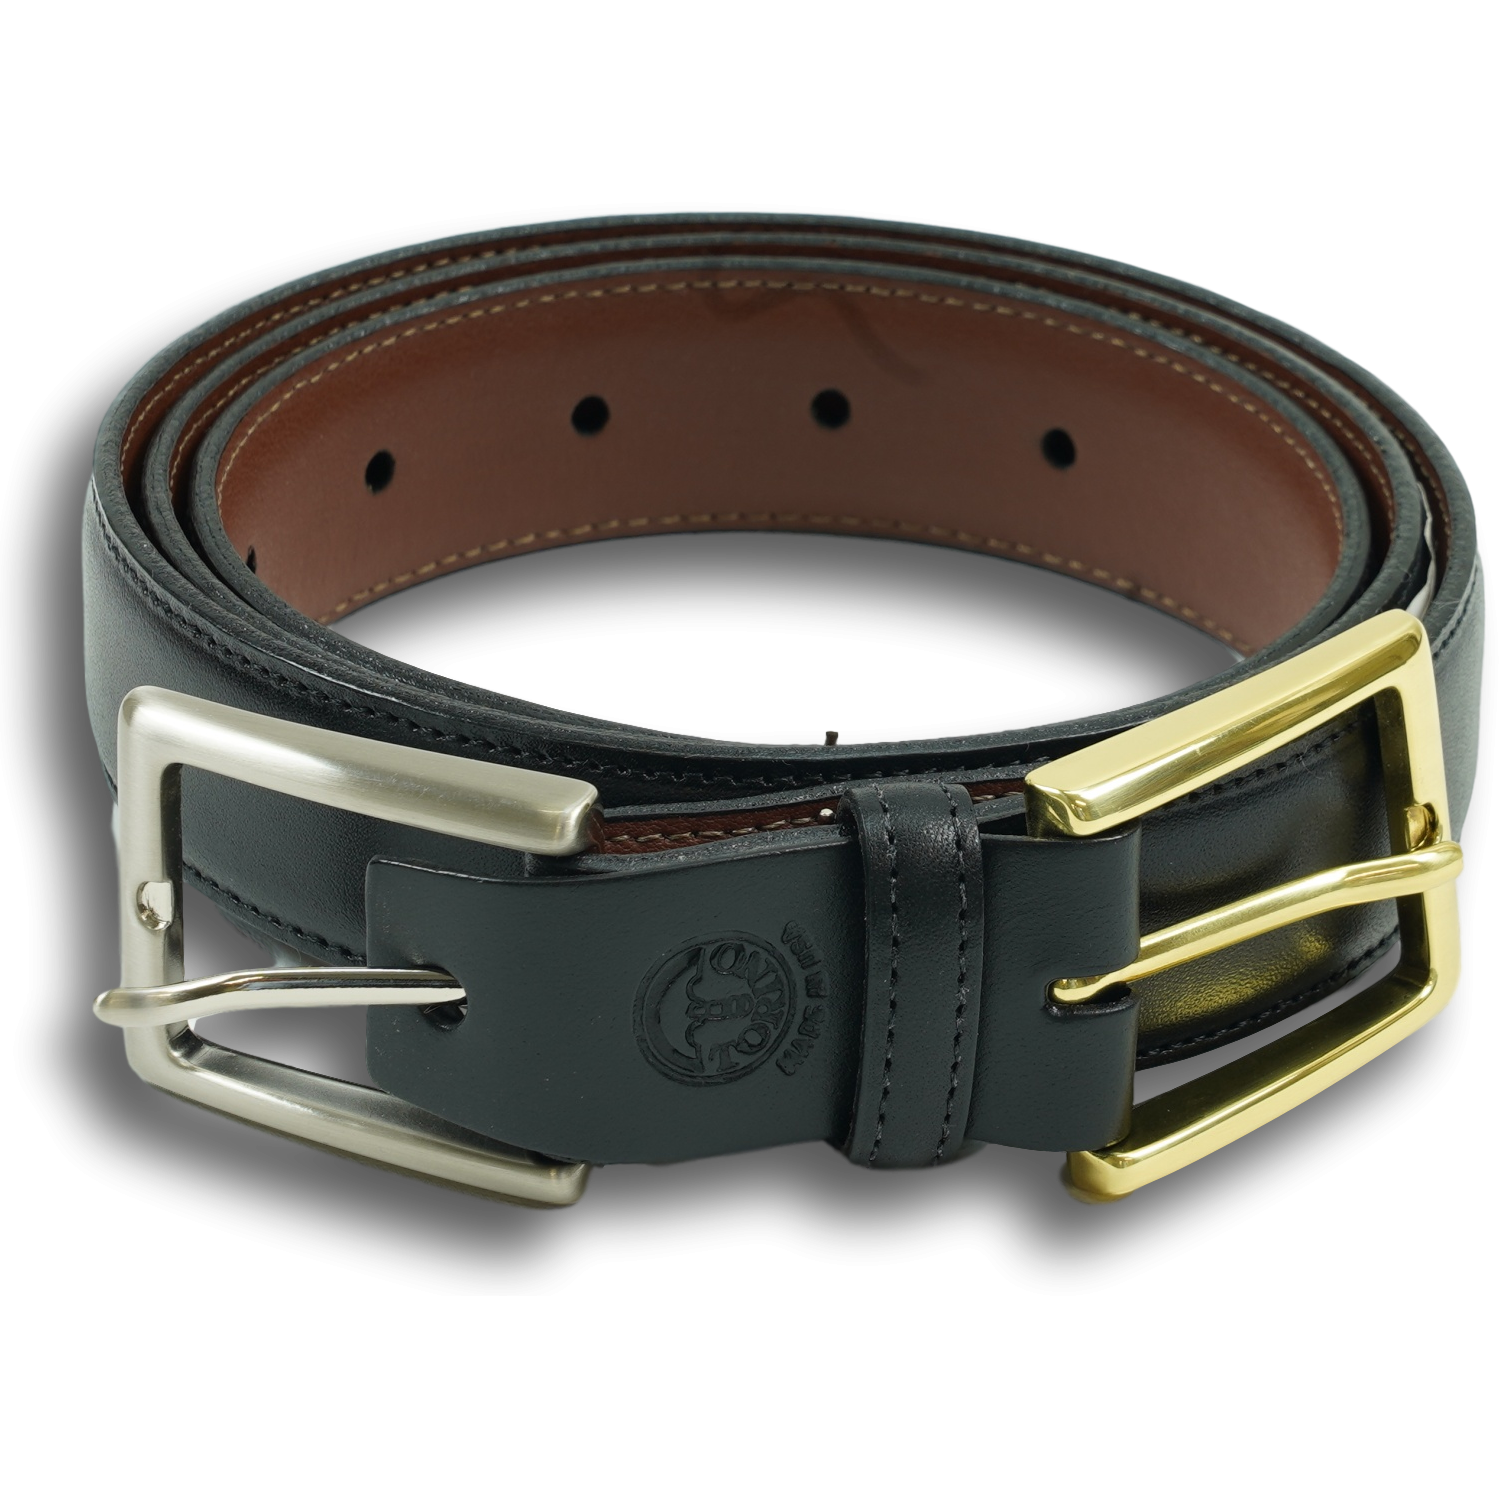 Kipskin Belt with Brass and Nickle Interchangeable Buckles